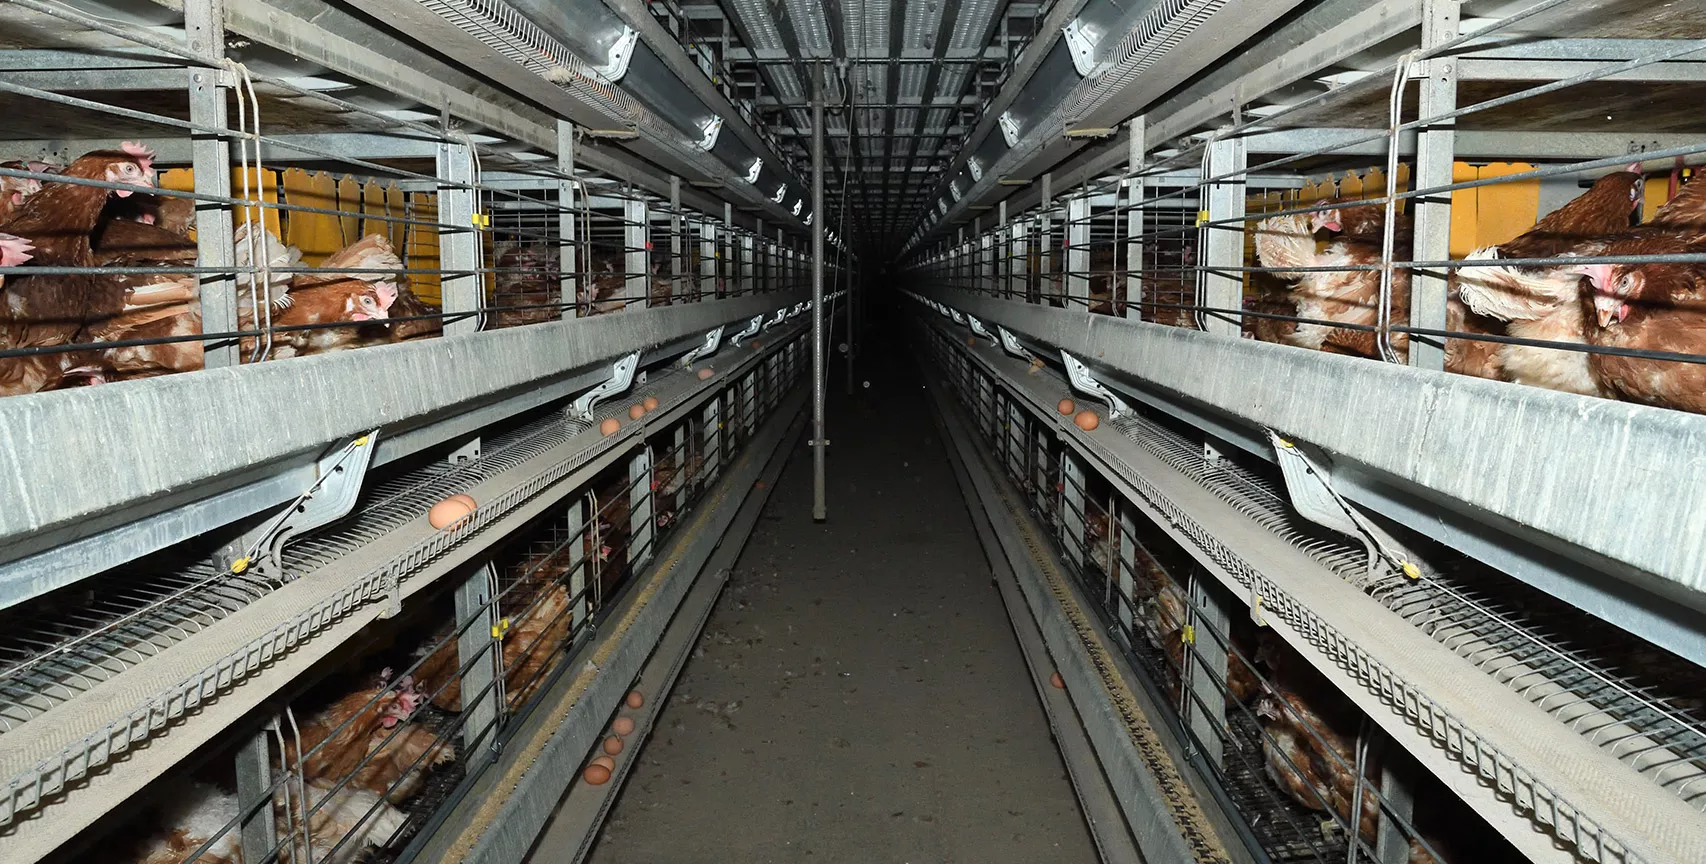 Corridor of egg farm with rows of cages